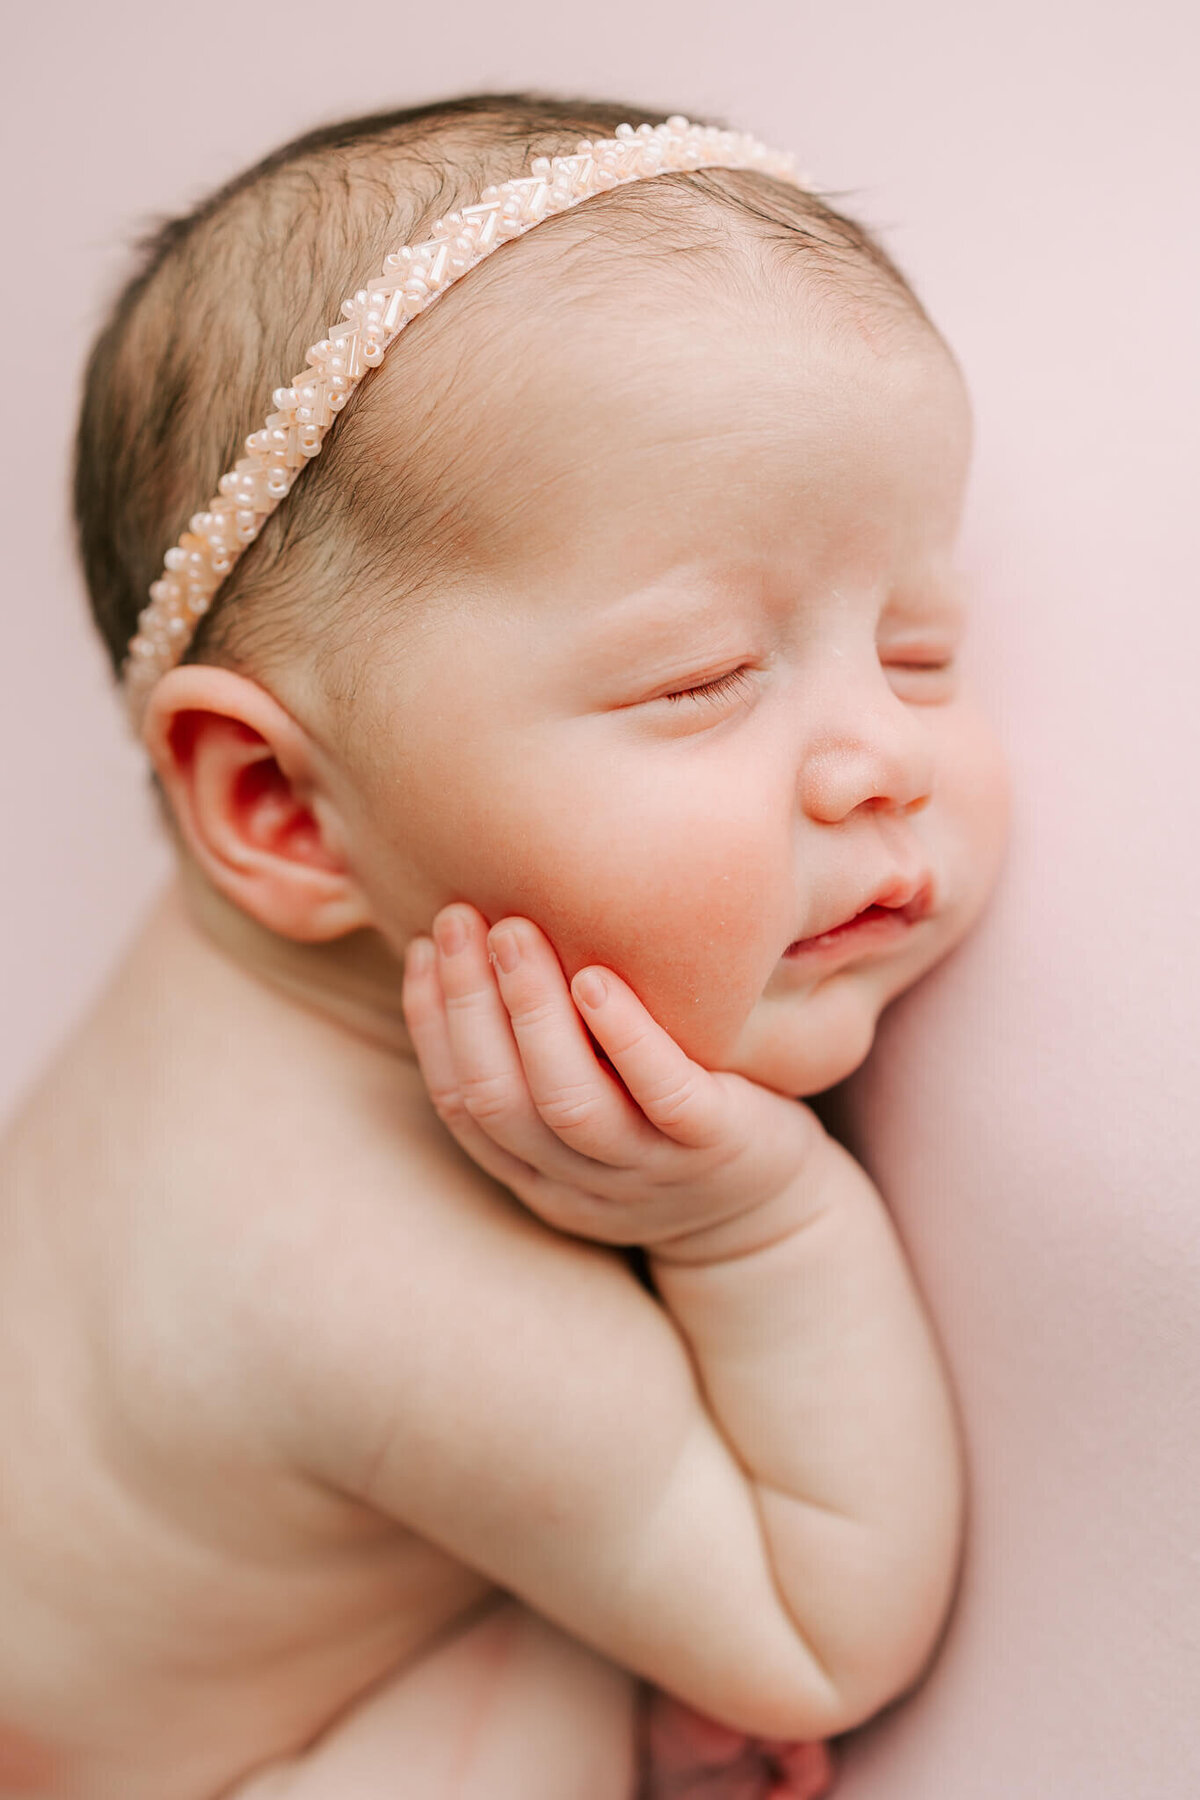 stunning portrait of a newborn baby girl with her hand on her cheek. She is wearing a pink headband